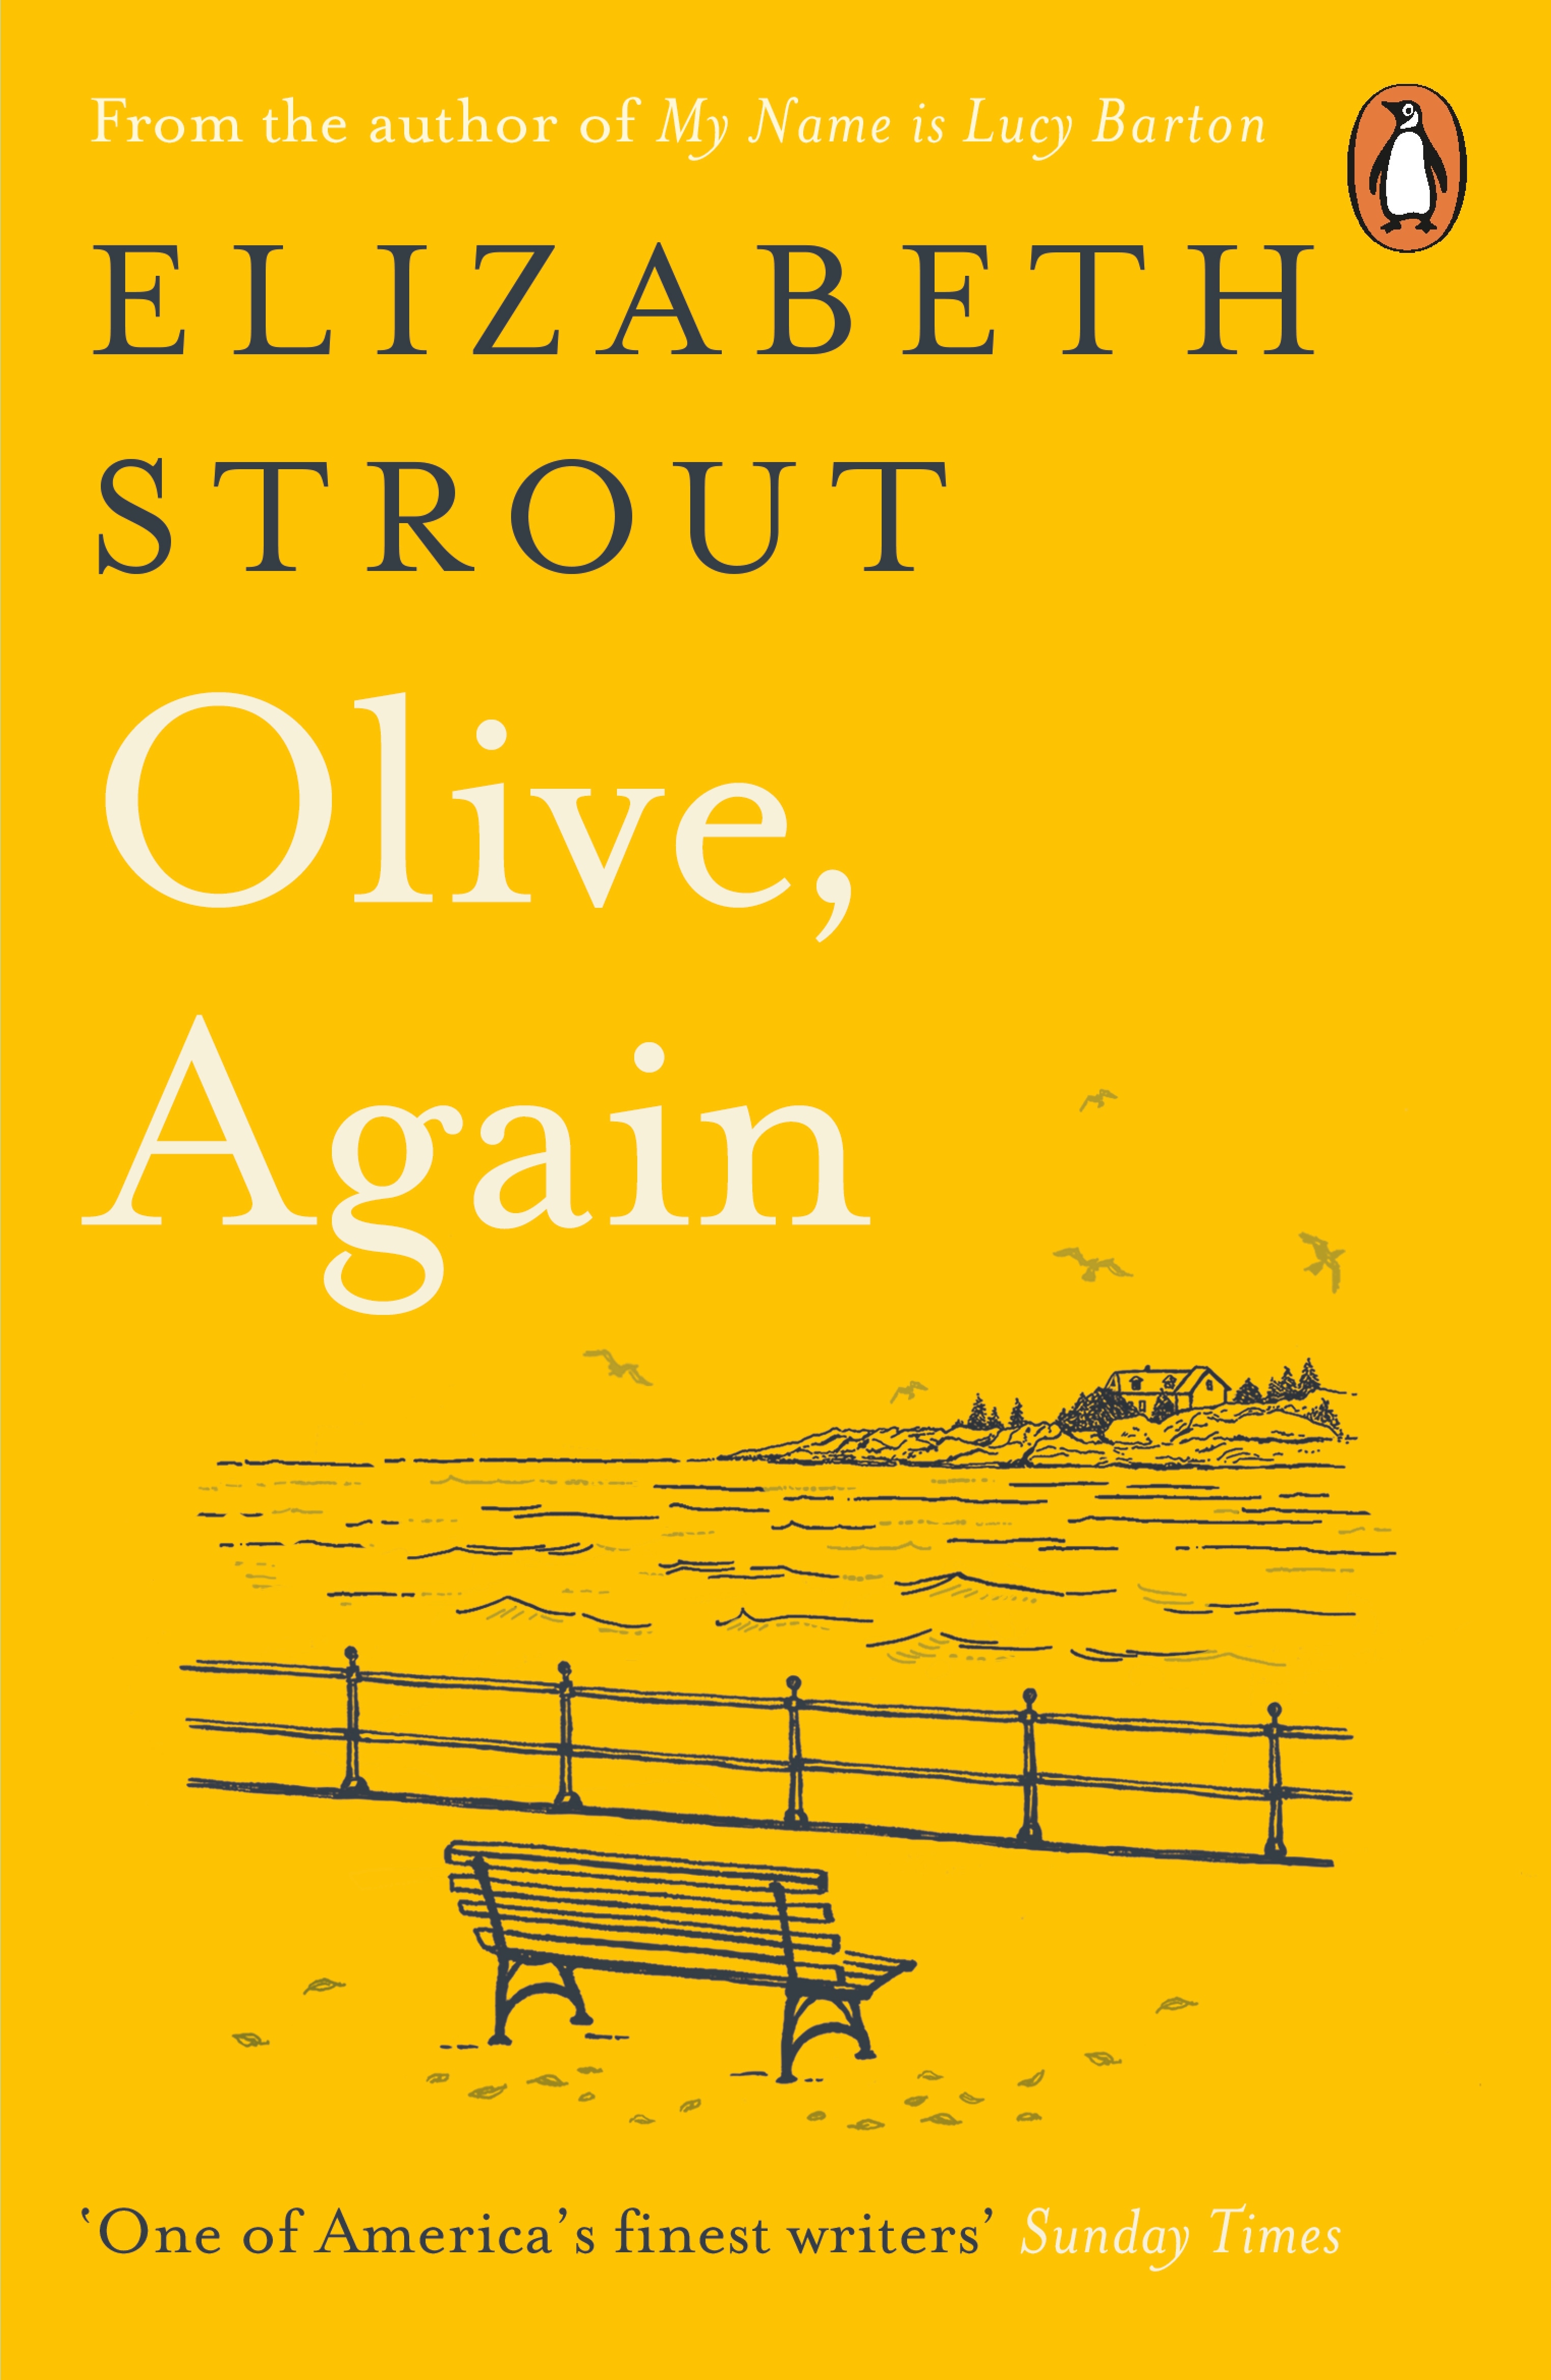 Book “Olive, Again” by Elizabeth Strout — November 5, 2020